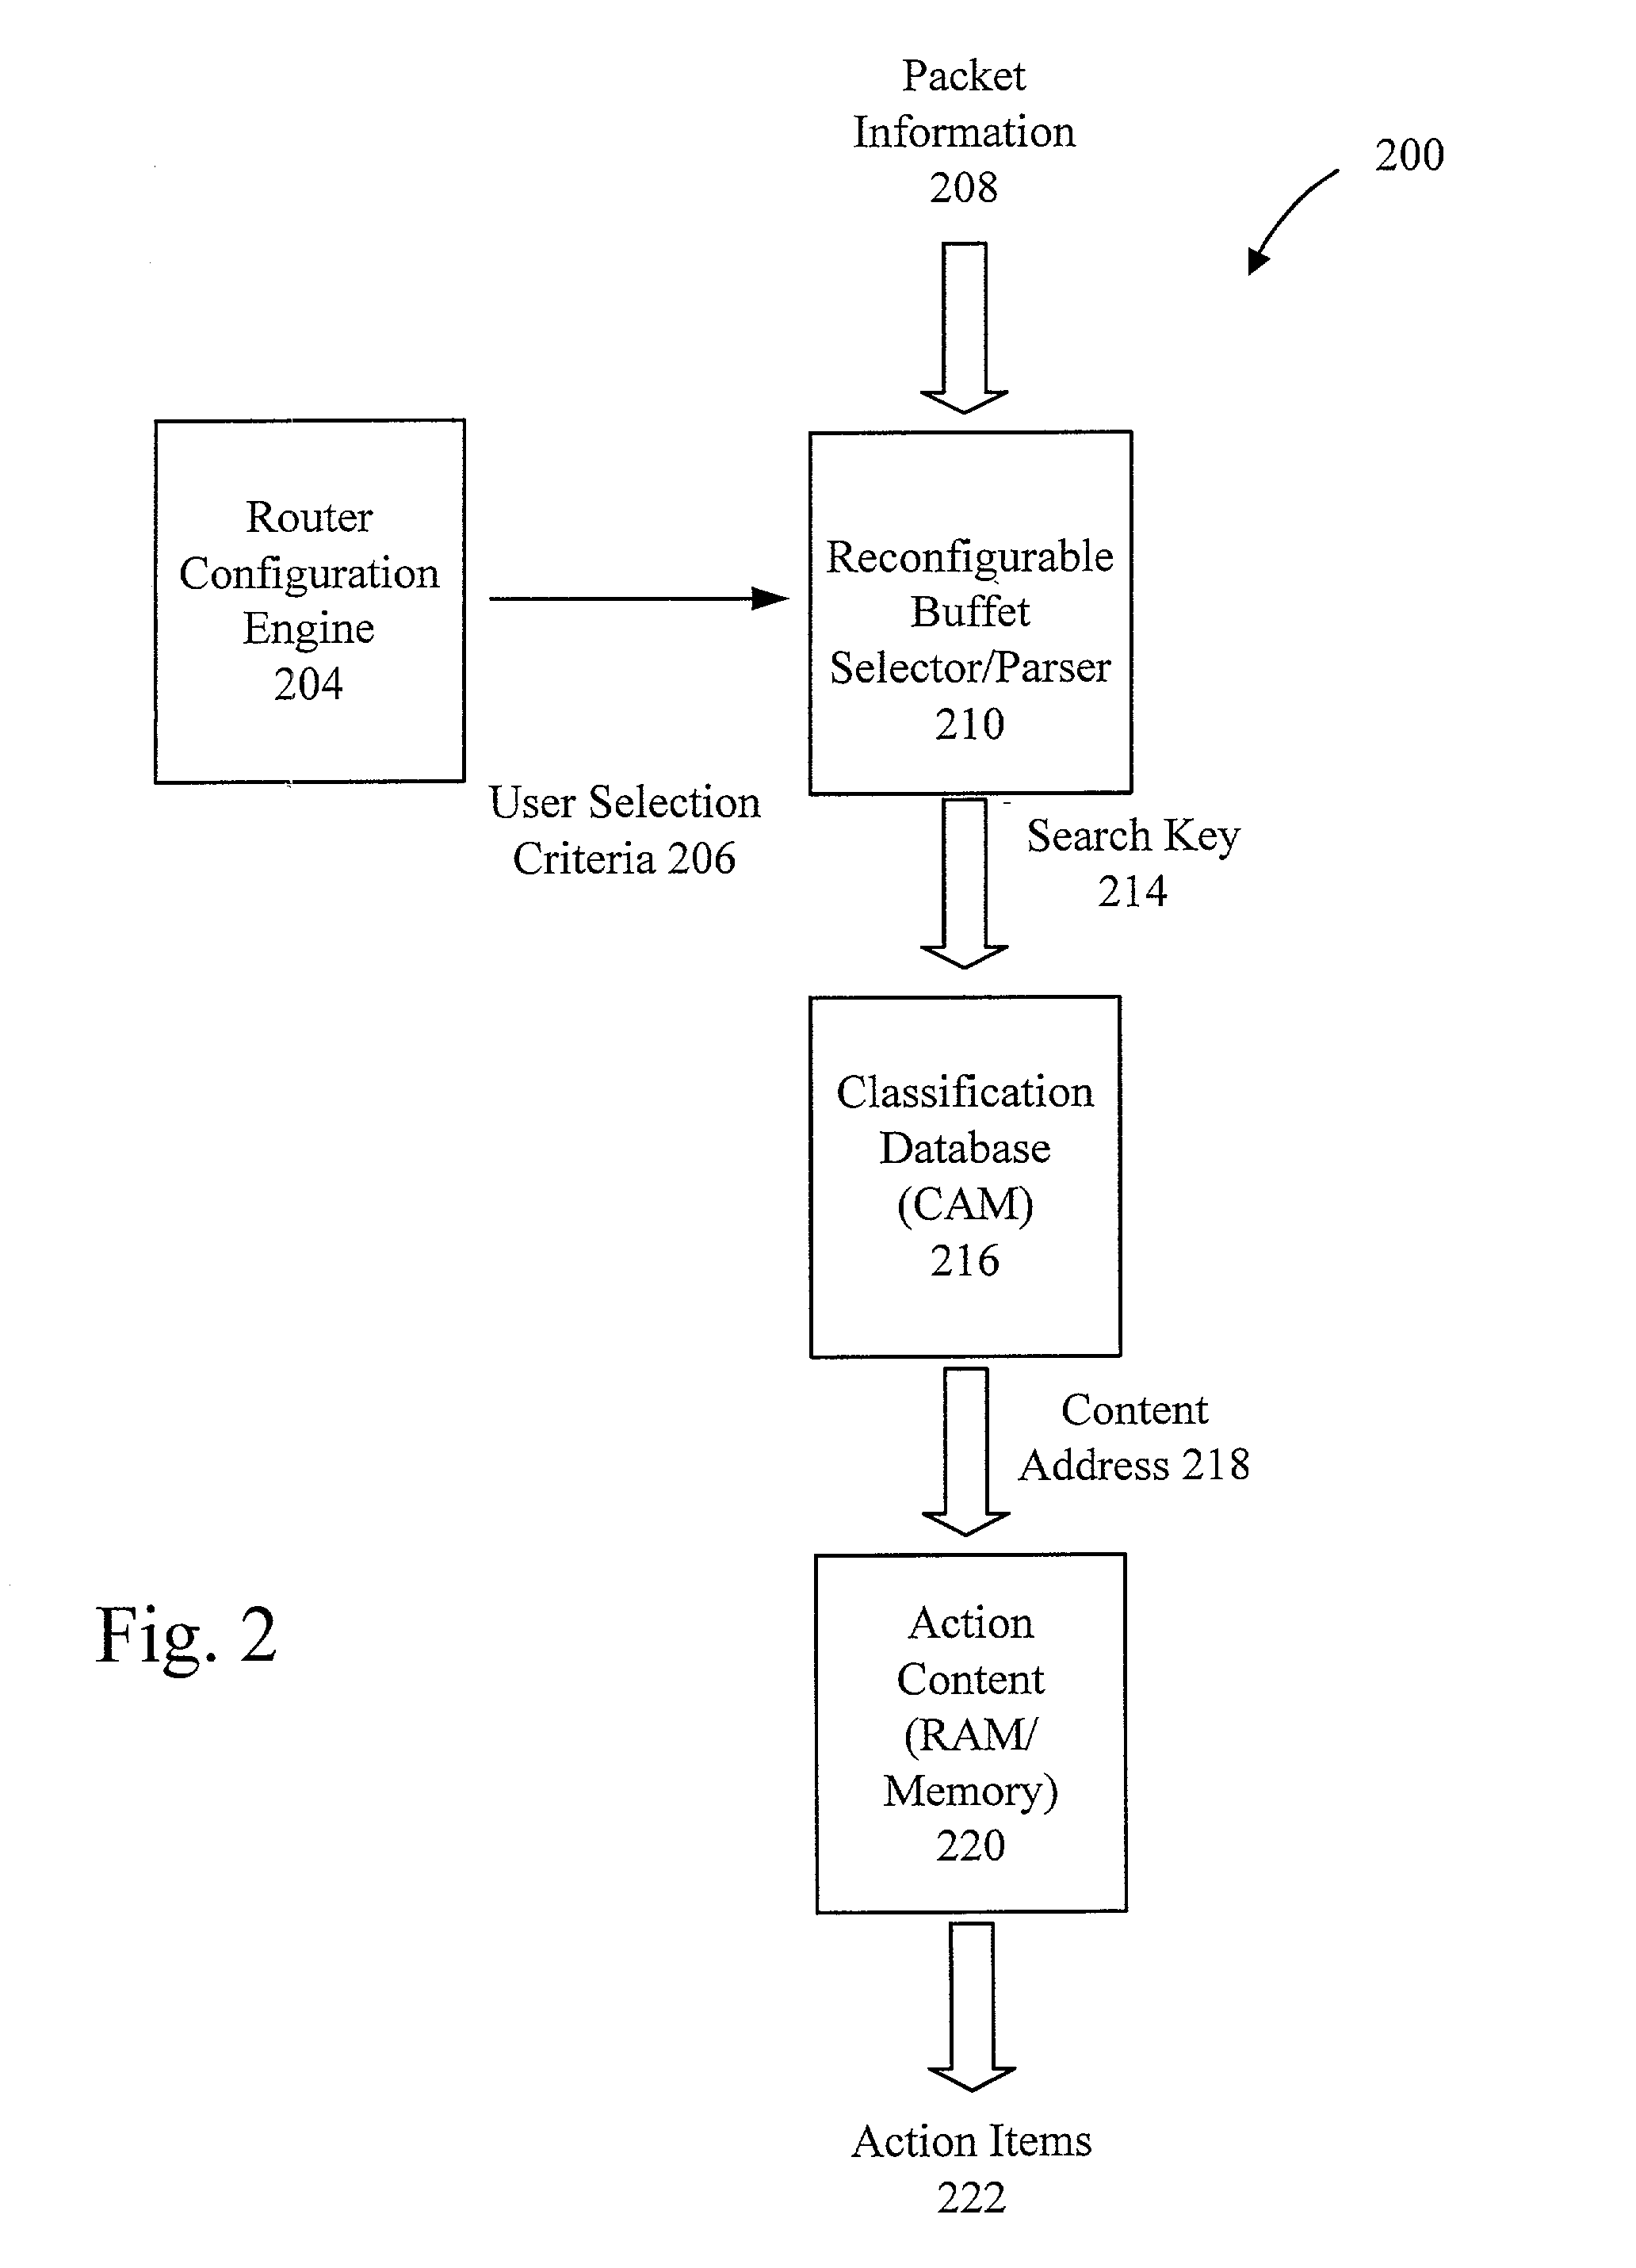 Method and apparatus for a flexible and reconfigurable packet classifier using content addressable memory